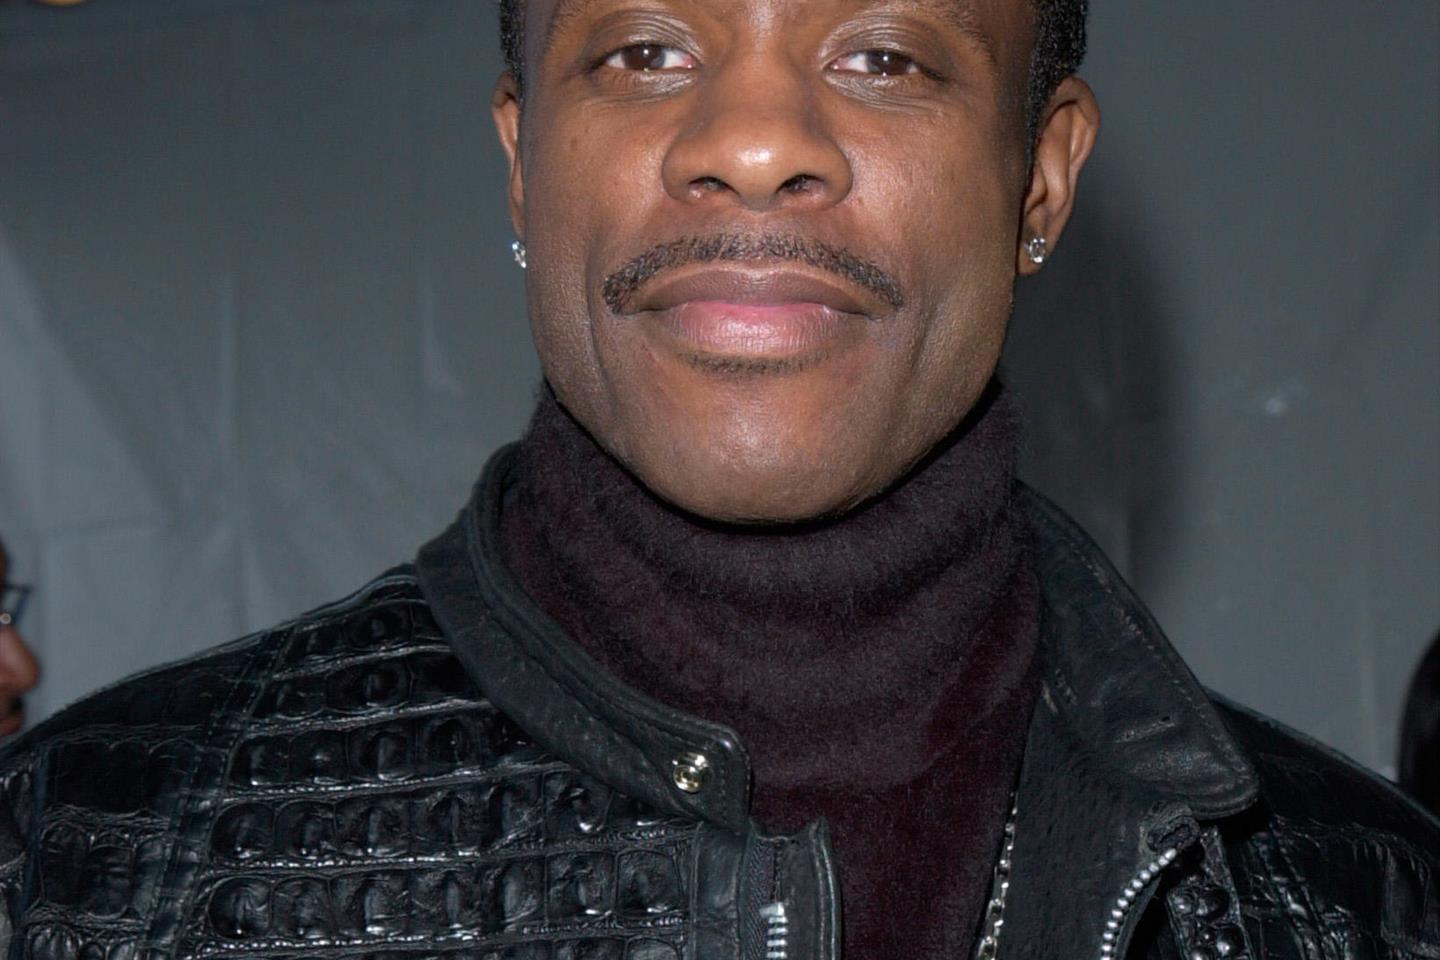 Keith Sweat Tickets Keith Sweat Tour Dates 2021 and Concert Tickets